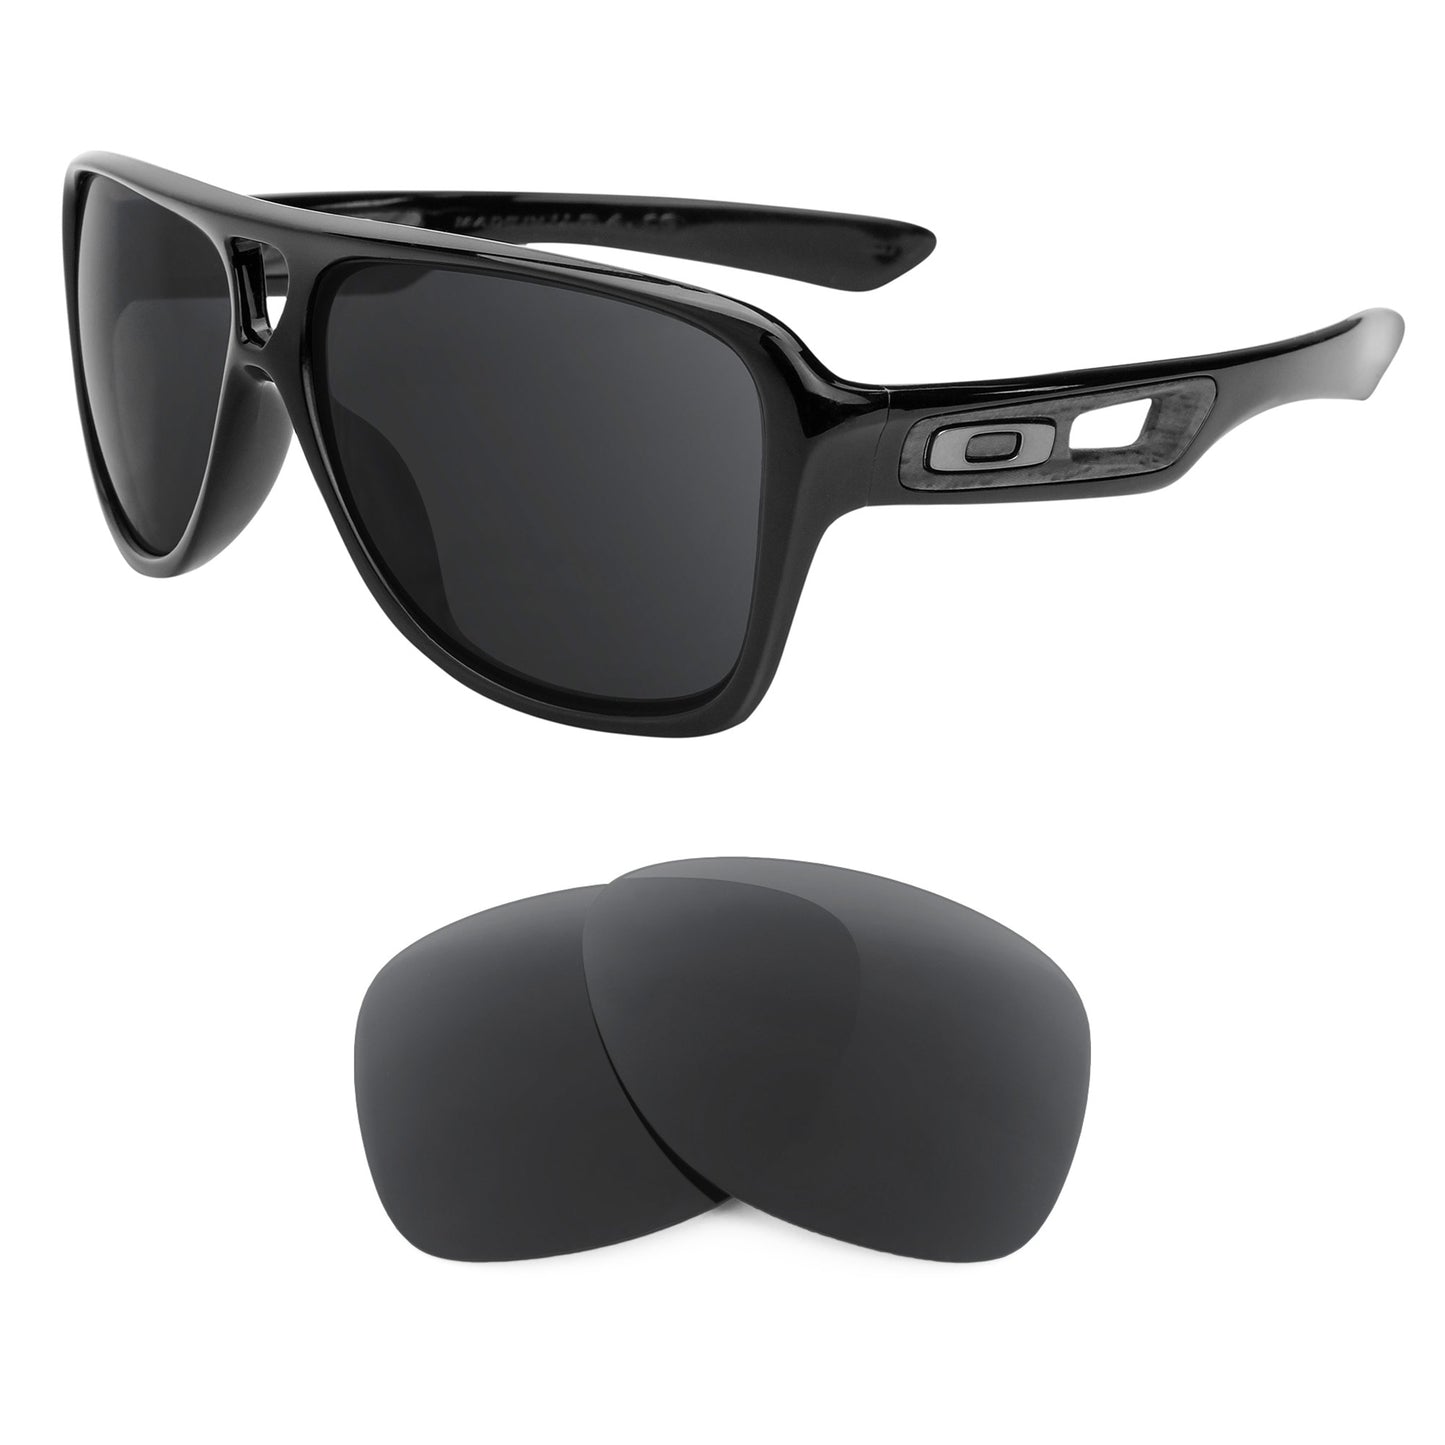 Oakley Dispatch 2 sunglasses with replacement lenses